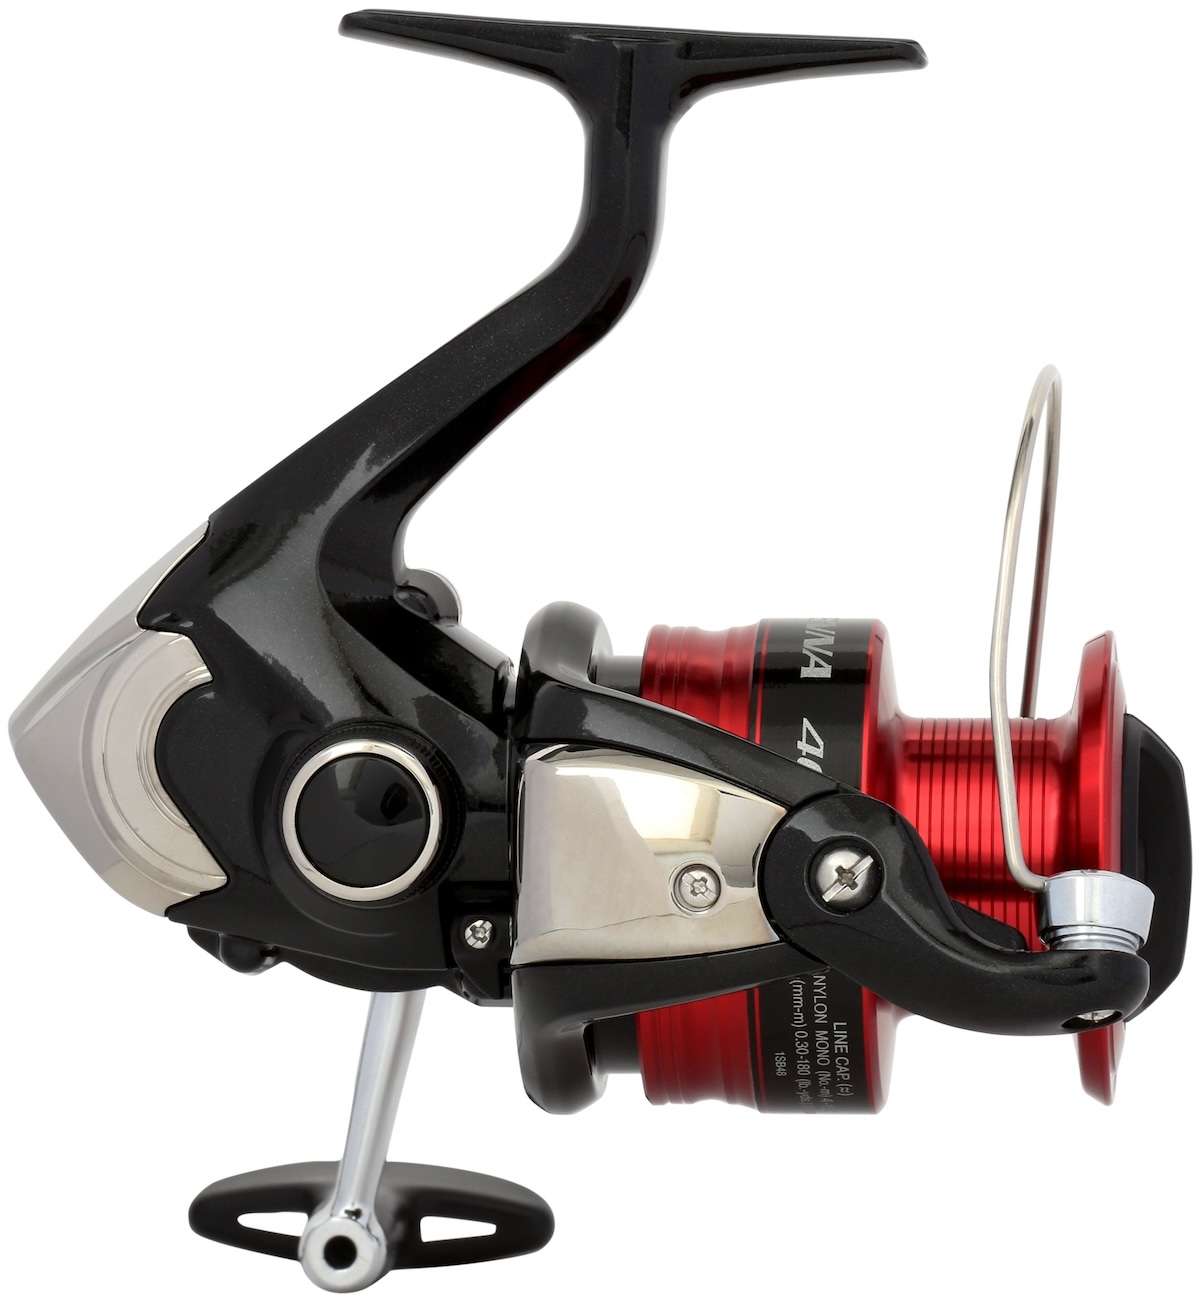 Shimano Sienna Spinning Reel 4000 Reel Size, 5.1:1 Gear Ratio, 32 Retrieve  Rate, Ambidextrous, Boxed 